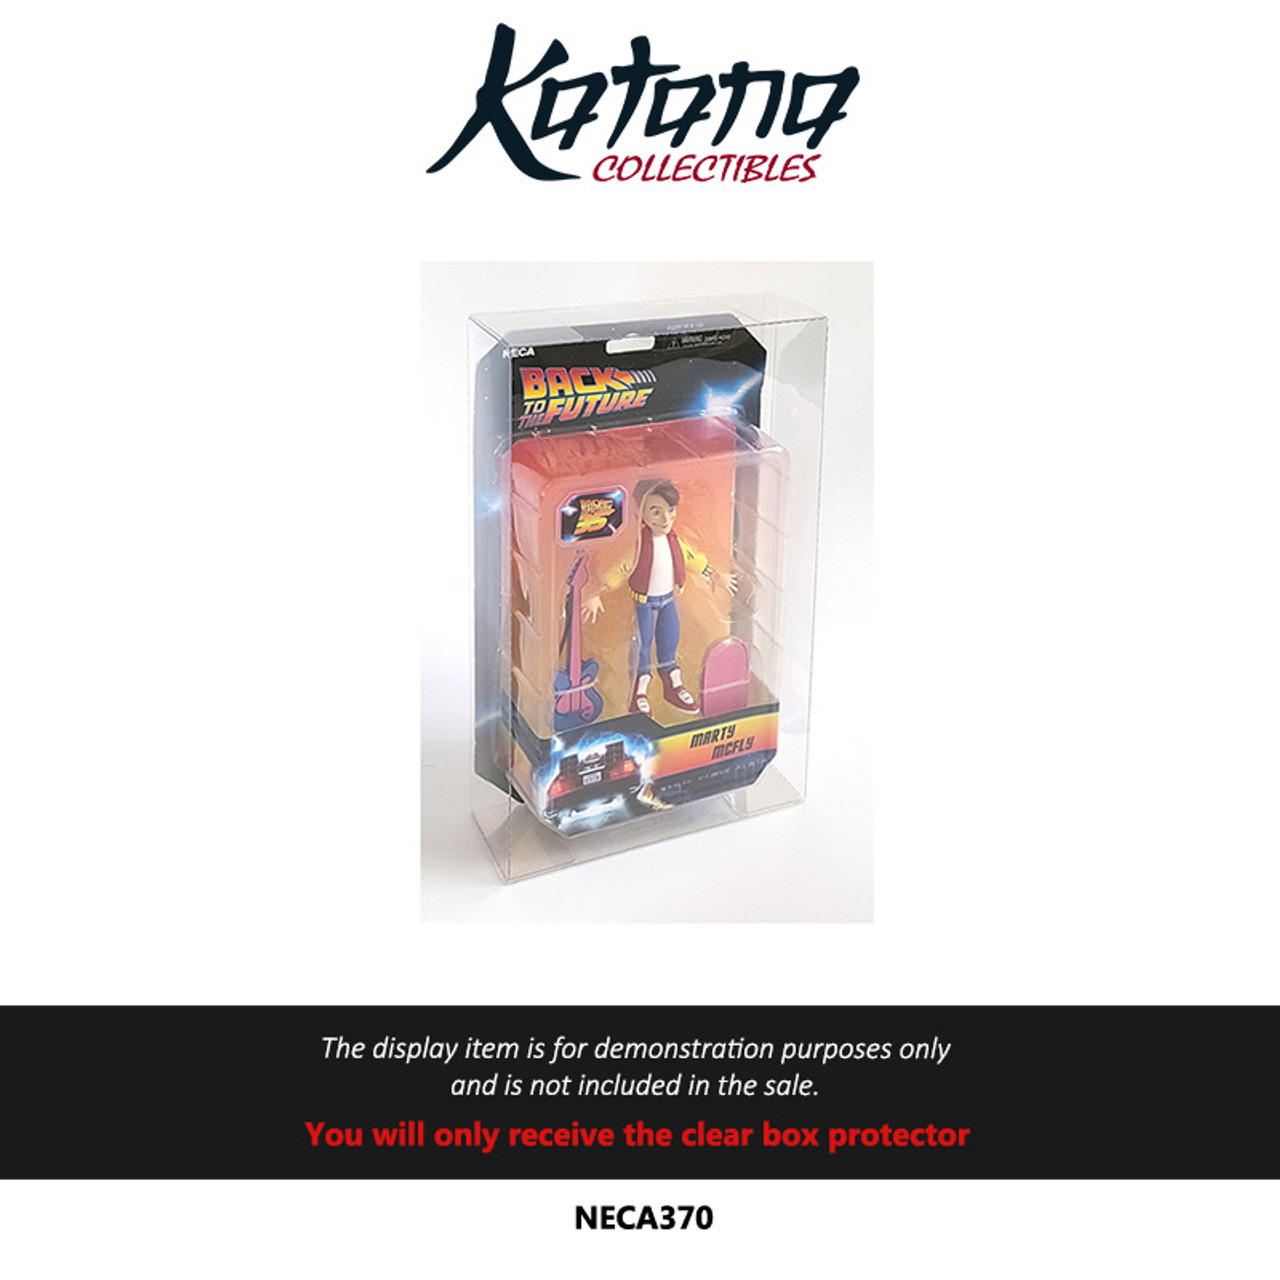 Katana Collectibles Protector For NECA Back to the Future Marty McFly Figure